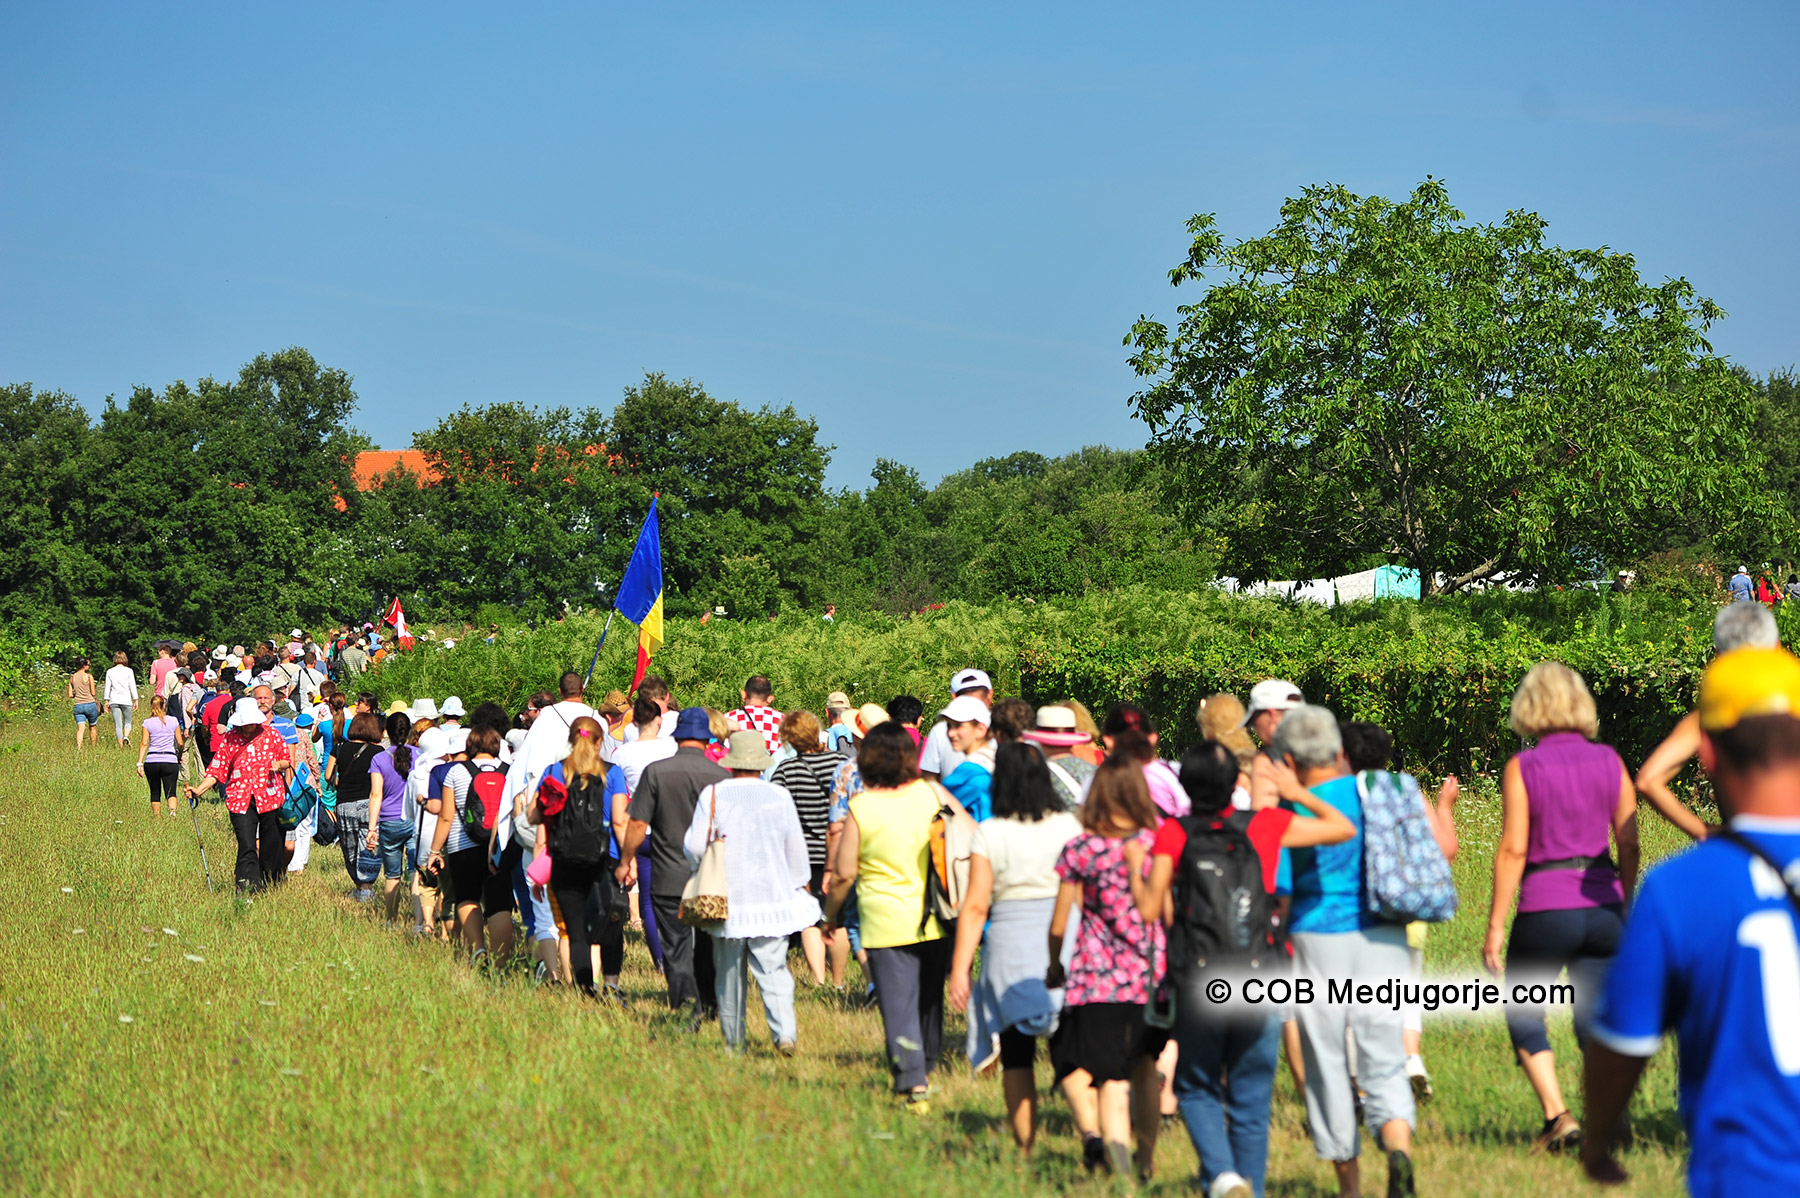 Pilgrims at Mirjana's apparition of Our Lady August 2, 2014